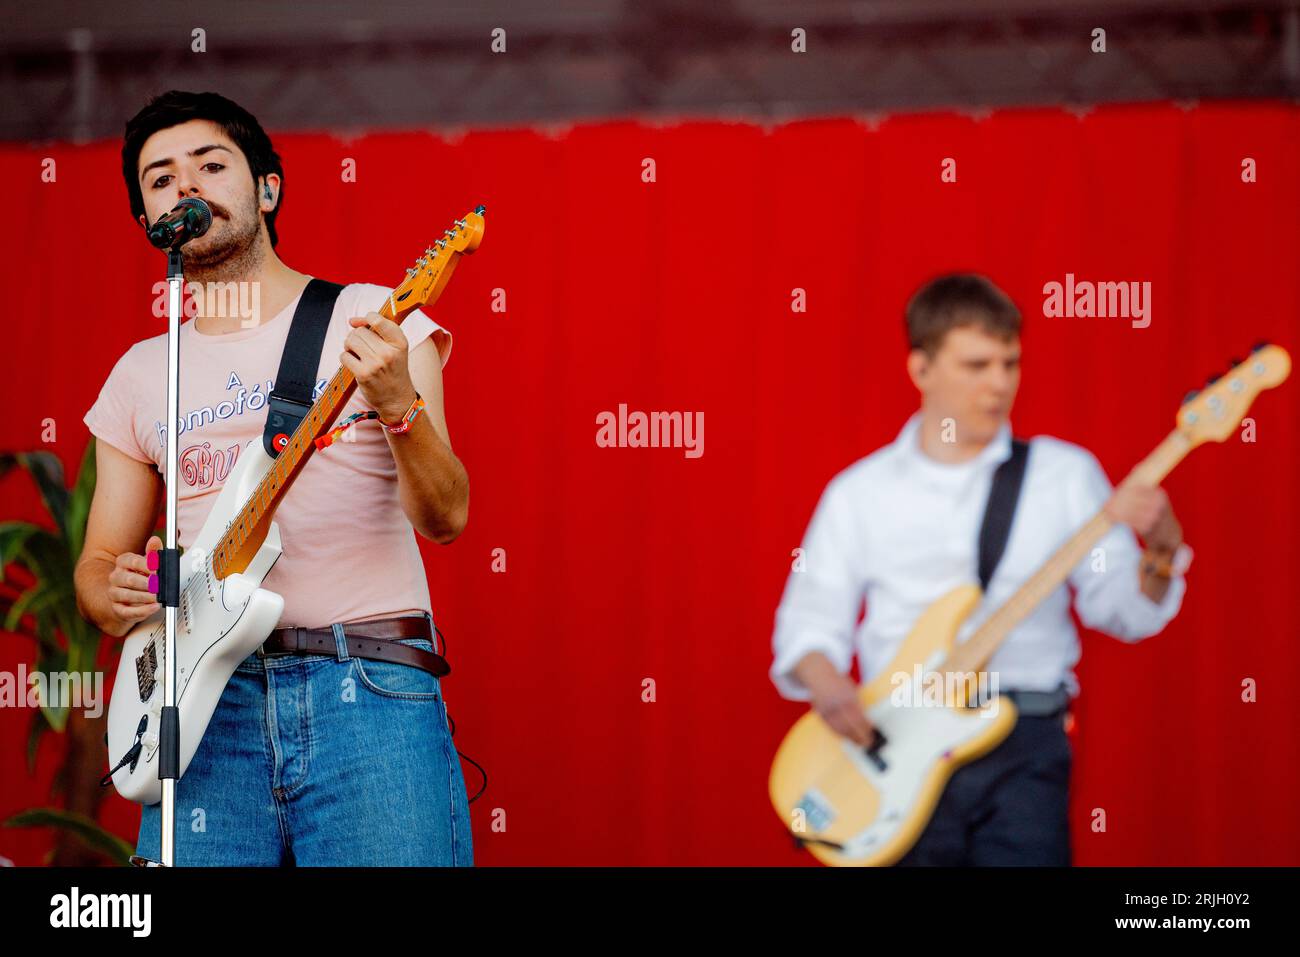 Hungary 11 August 2023 Carson Coma live at Sziget Festival in Budapest © Andrea Ripamonti / Alamy Stock Photo